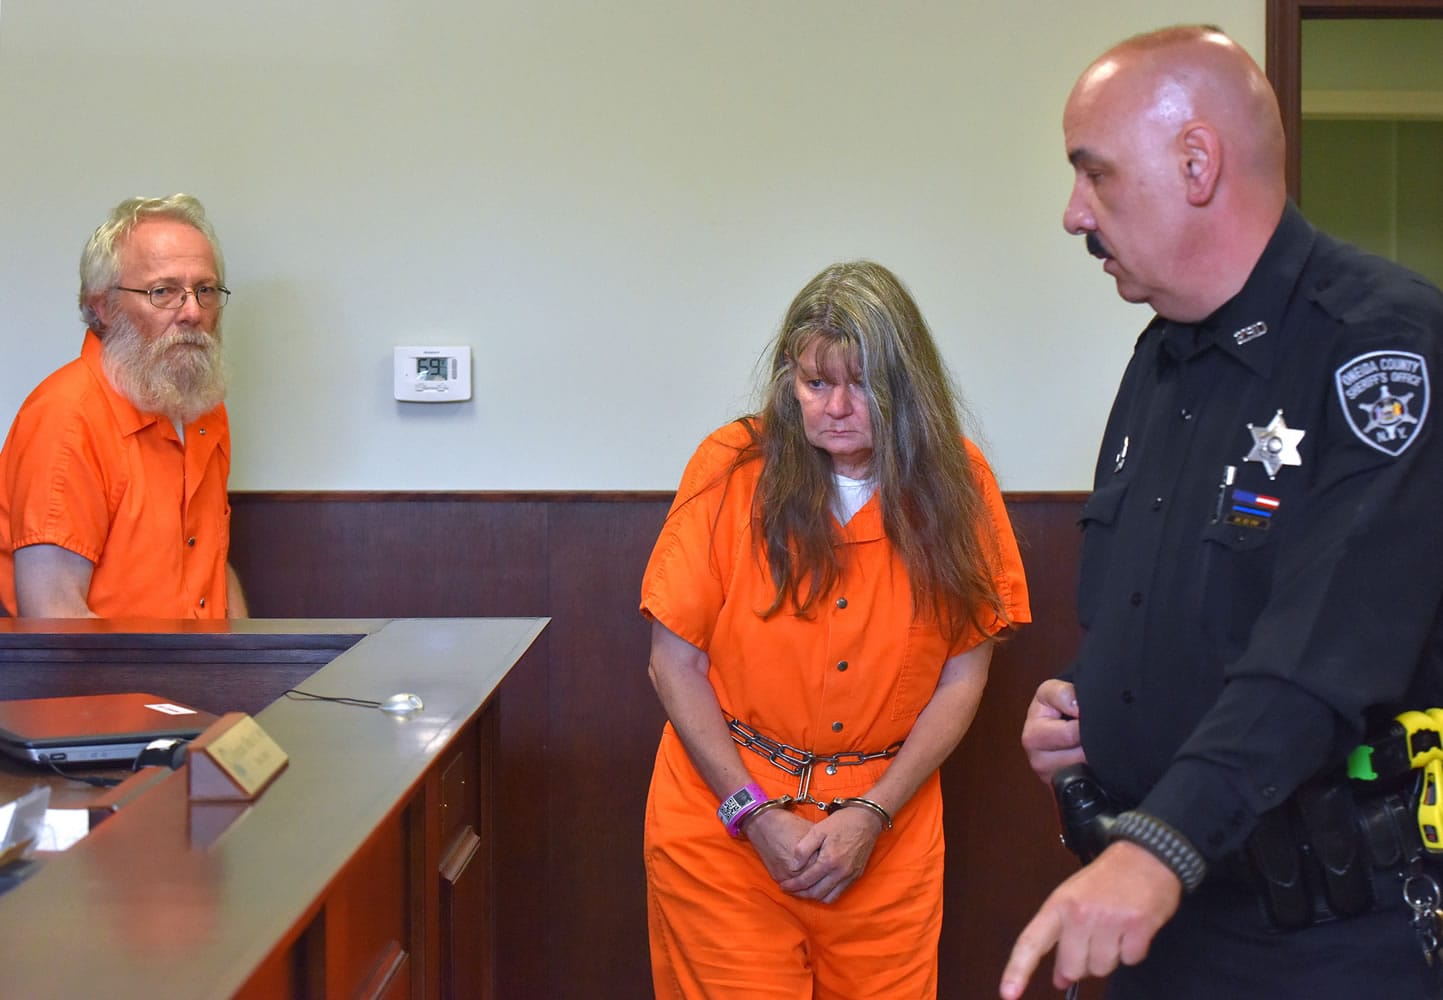 Bruce Leornard and Deborah Leonard enter the courtroom before their arraignment Tuesday in New Hartford, N.Y.